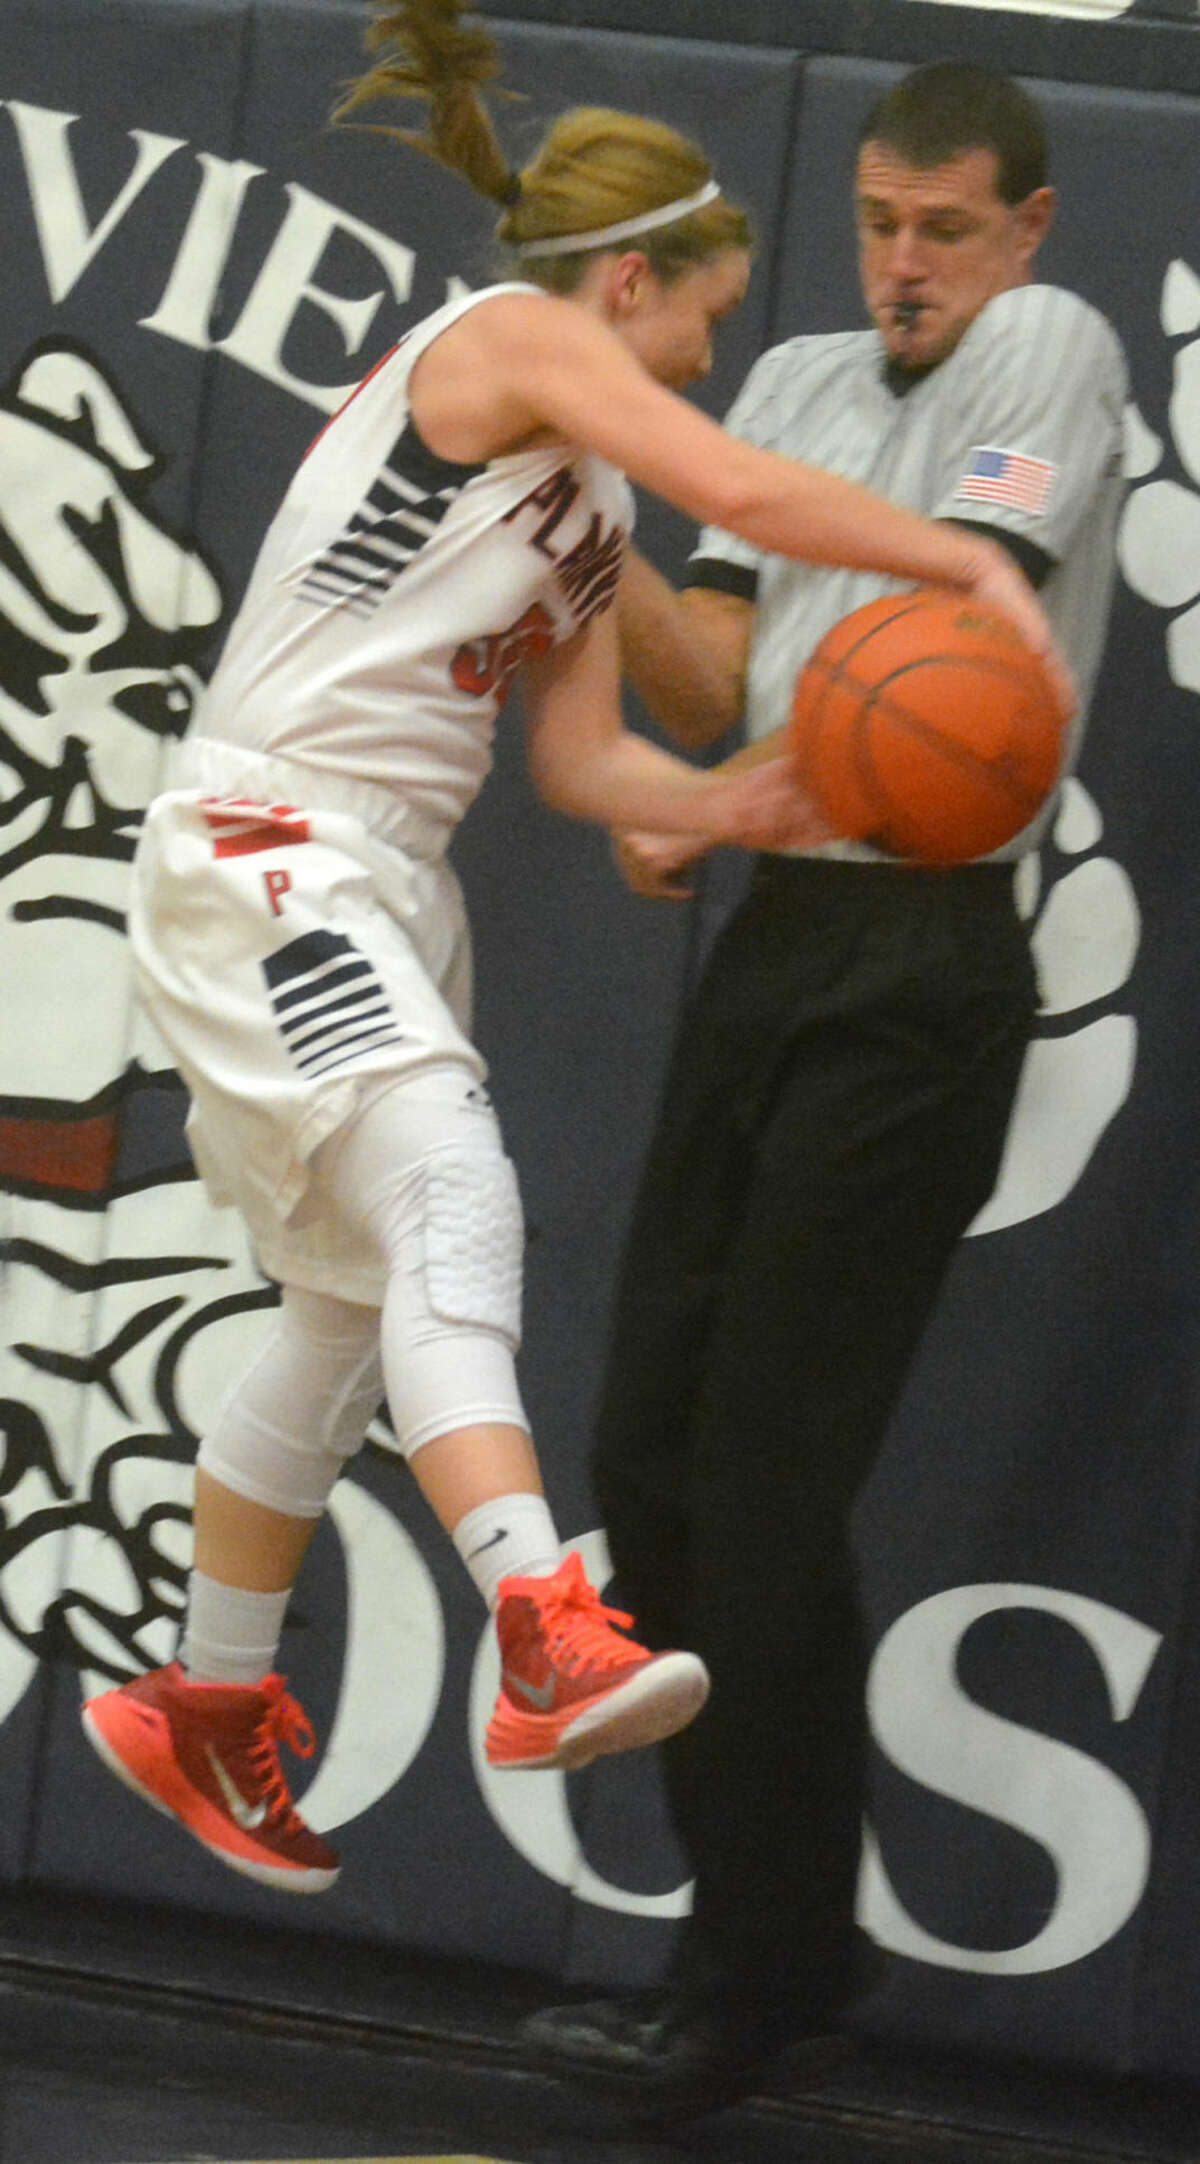 Plainview's Jaden Gonzales tries to save the ball from going out of bounds as an official tries to stay out of the way during a game against Hereford Tuesday night.